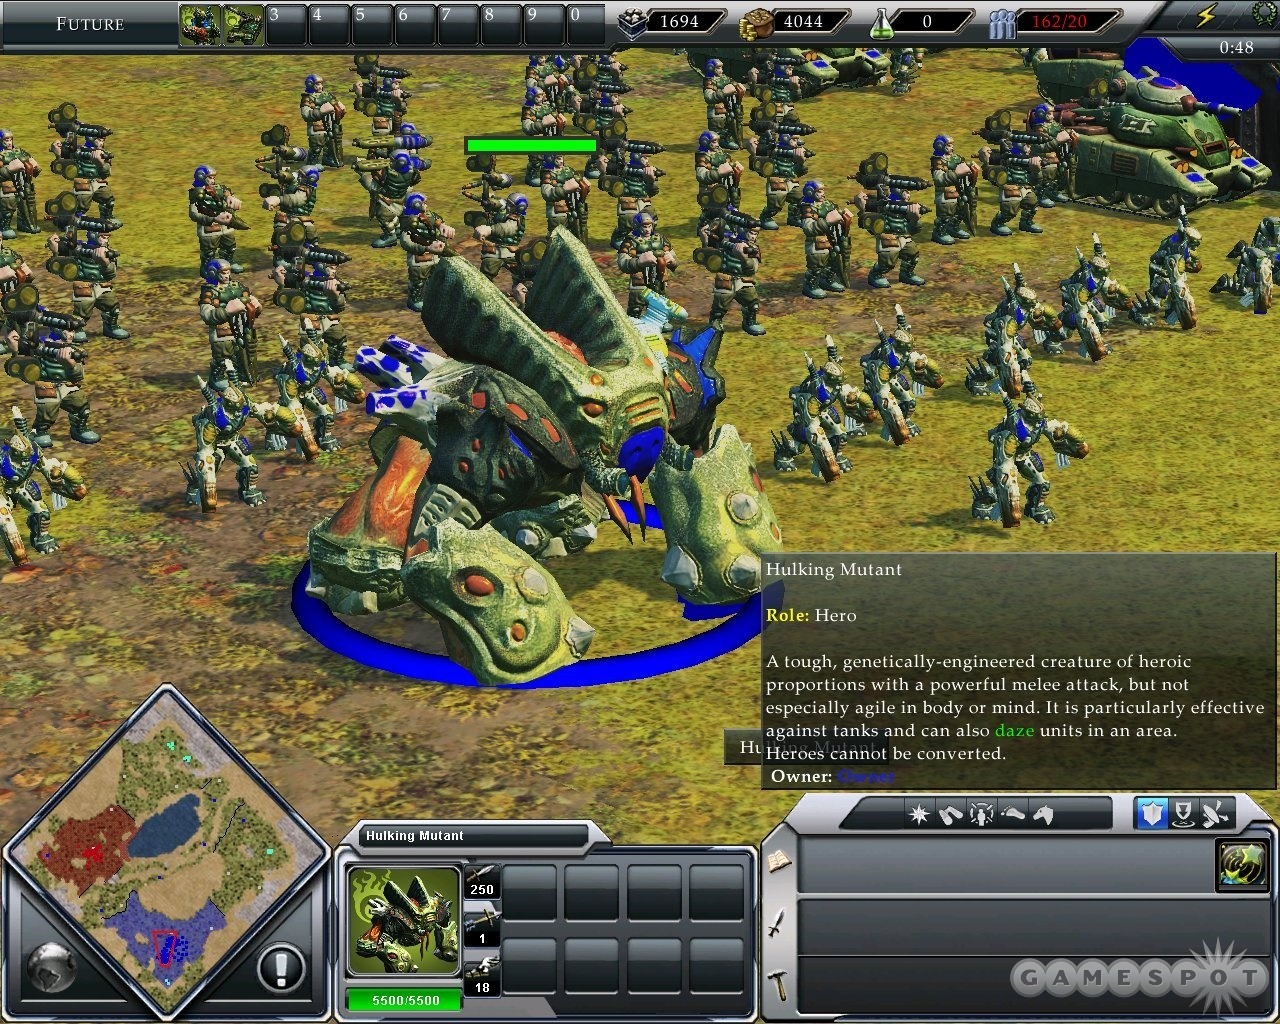 Empire earth pc game download free